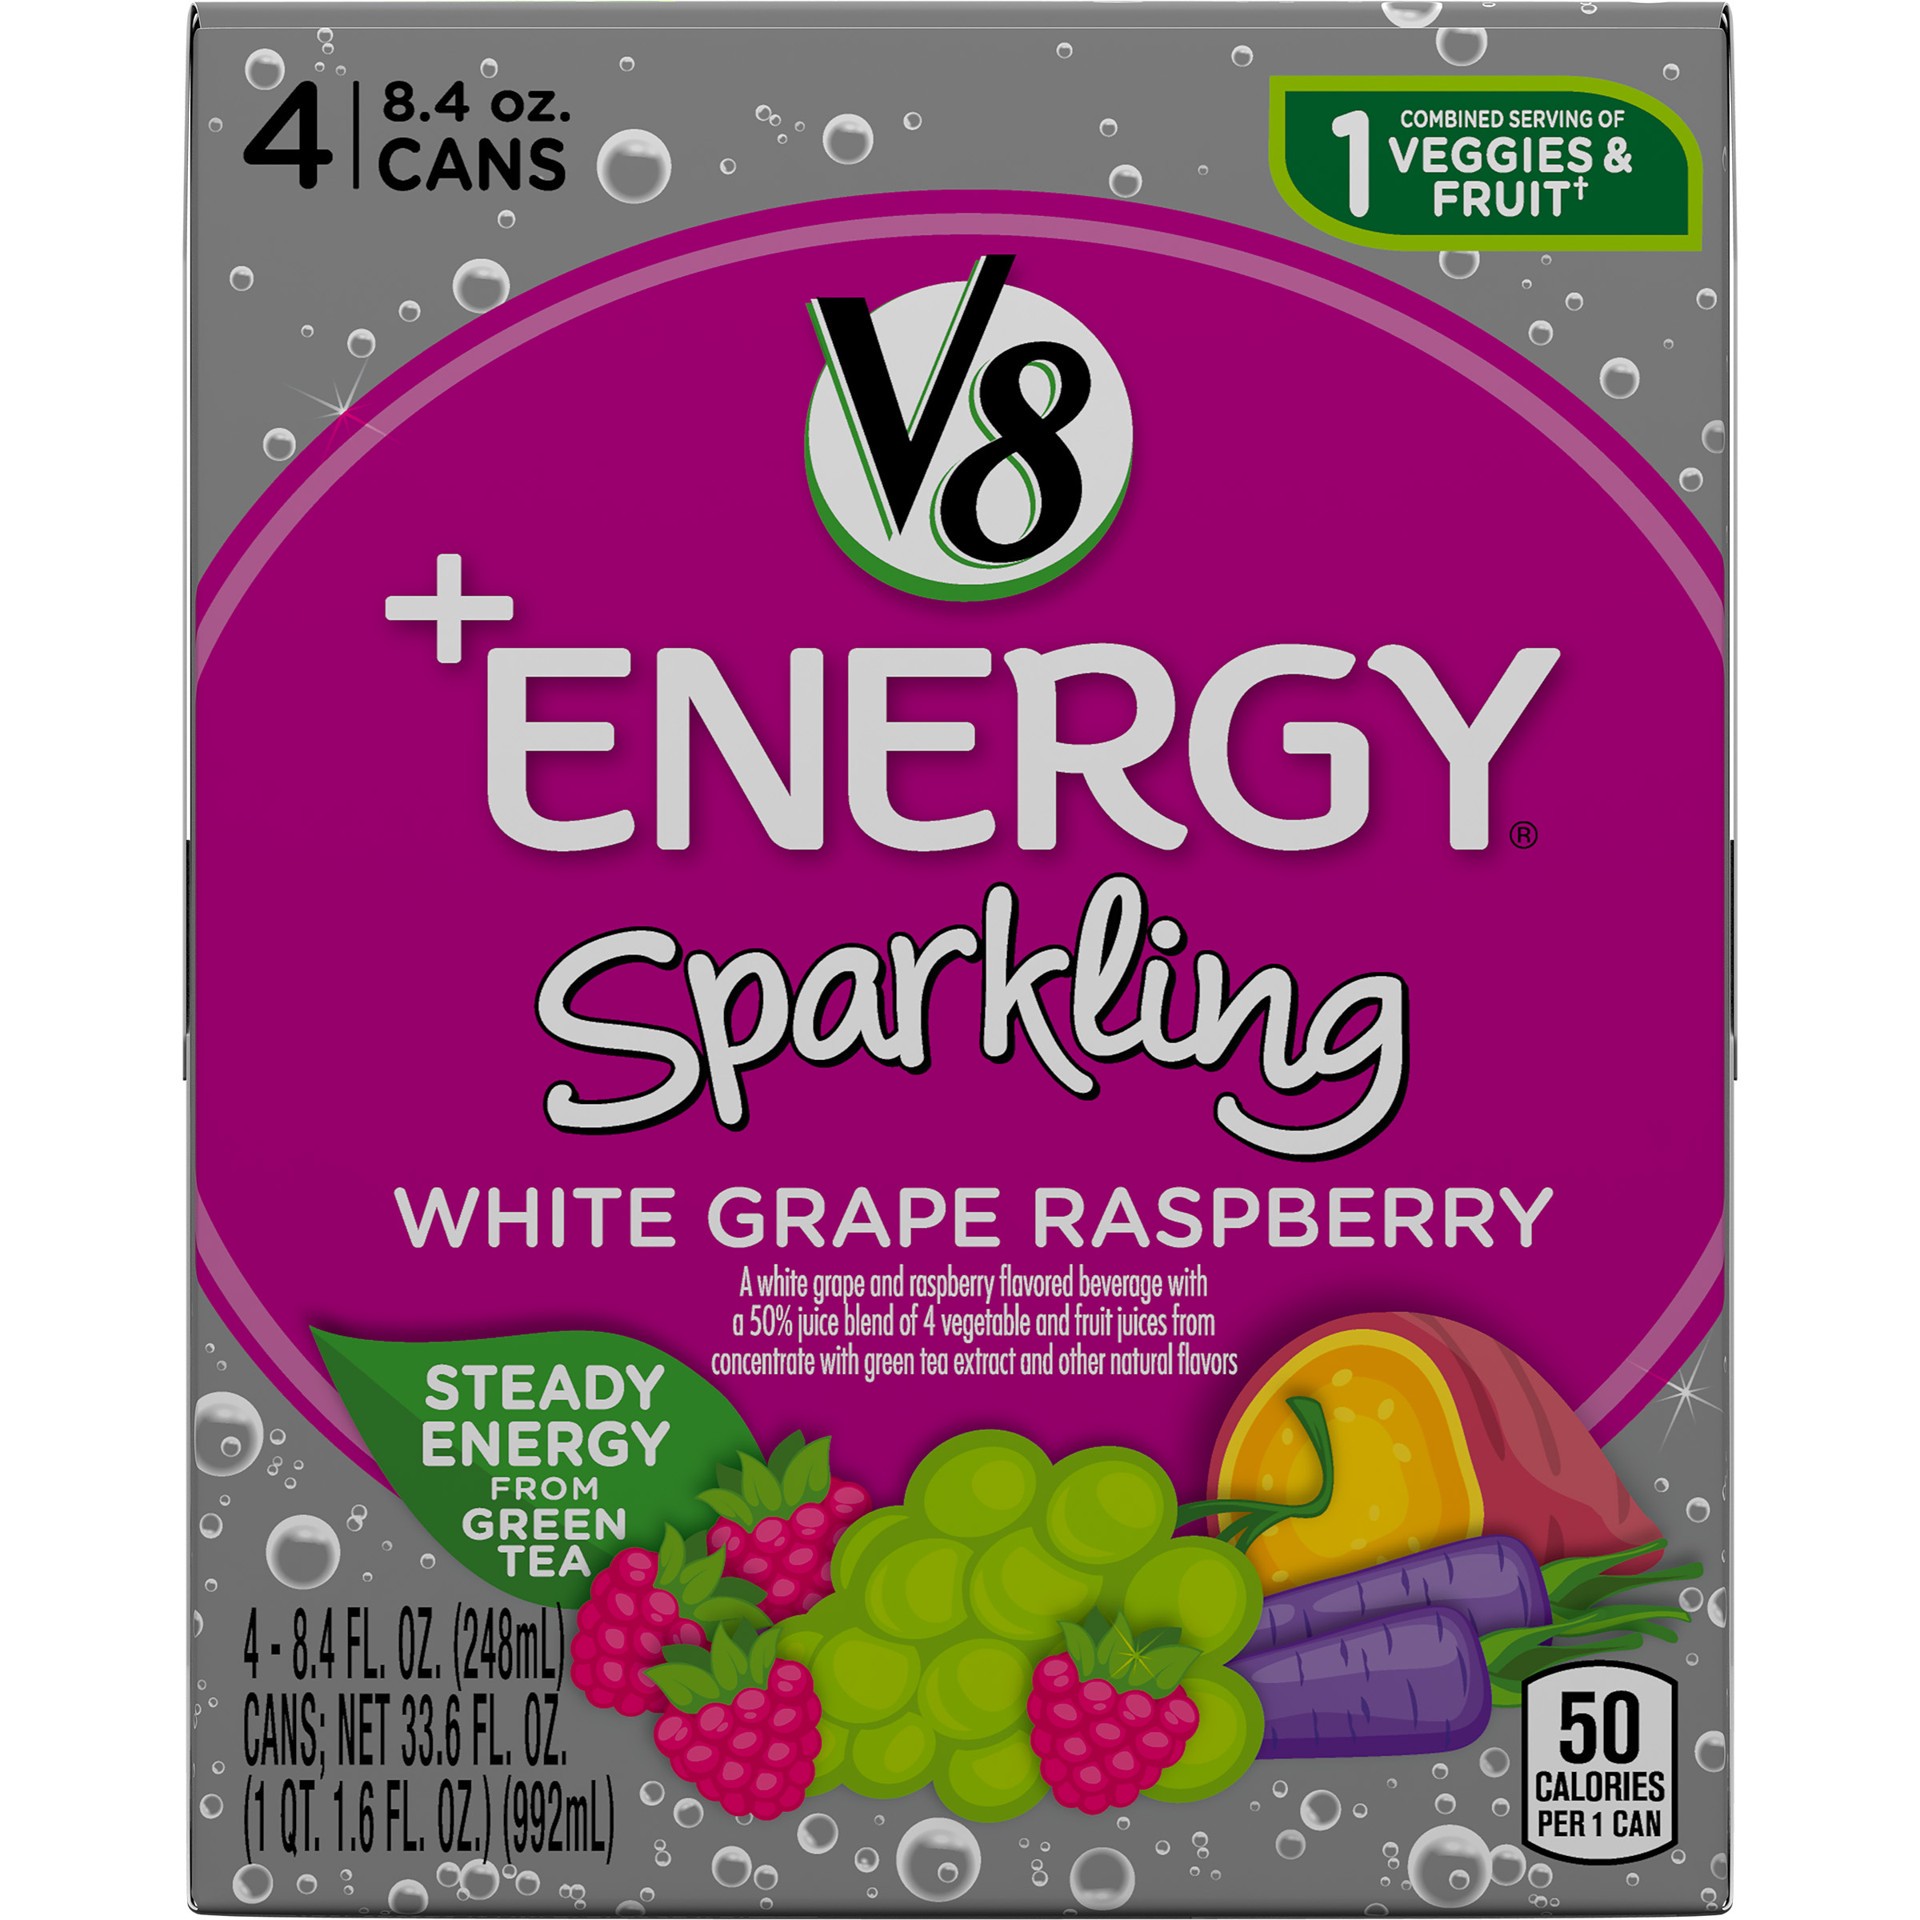 slide 5 of 5, V8 +Energy Sparkling Healthy Energy Drink, Natural Energy from Tea, White Grape Raspberry, 8.4 Oz Can (4 Count), 33.6 oz